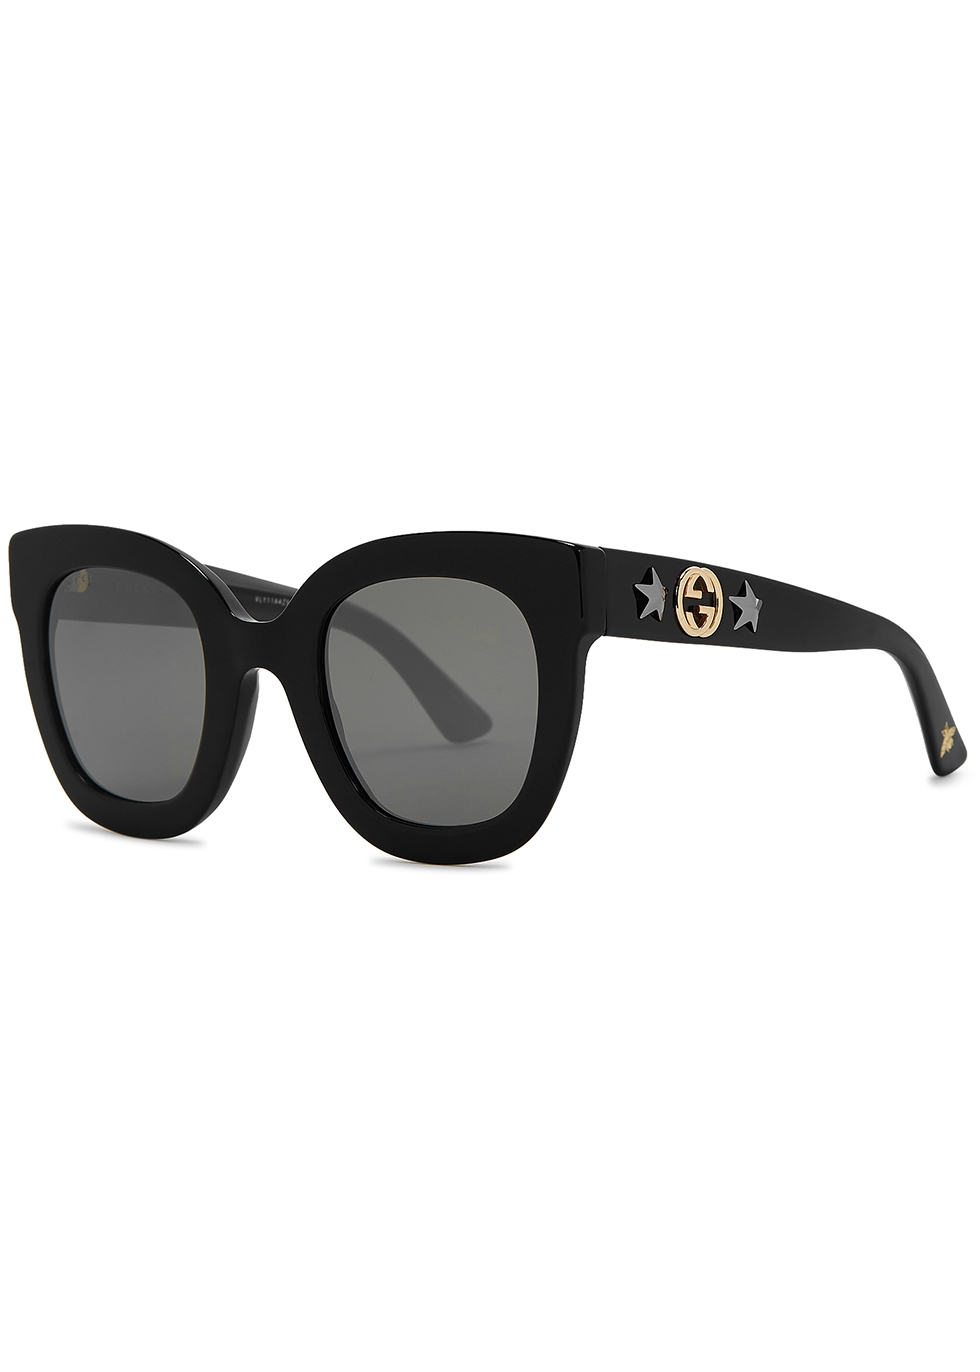 gucci black sunglasses with bee